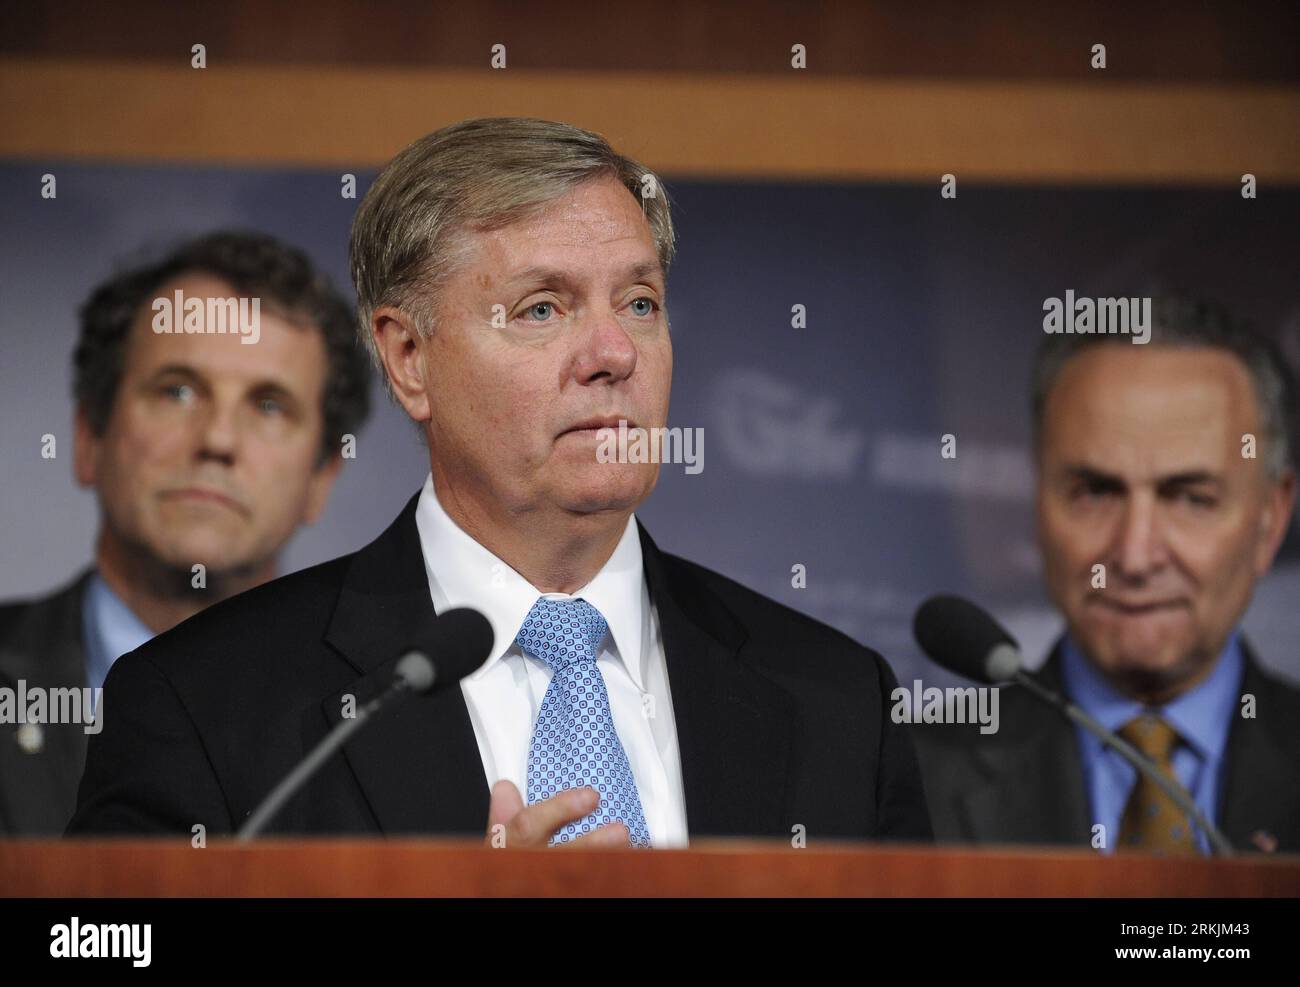 Bildnummer: 56143853  Datum: 03.10.2011  Copyright: imago/Xinhua (111004) -- WASHINGTON, Oct. 4, 2011 (Xinhua) -- (L-R) U.S. Senators Sherrod Brown, Lindsey Graham and Chuck Schumer attend a press conference in Washington D.C., on Oct. 3, 2011. The U.S. Senate voted Monday to allow a debate on a controversial bill on so-called currency manipulation by China amid strong opposition from China and U.S. business groups. (Xinhua/Zhang Jun) (nxl) US-WASHINGTON-SENATE-EXCHANGE RATE-PRESS CONFERENCE PUBLICATIONxNOTxINxCHN People Politik xjh x0x premiumd 2011 quer      56143853 Date 03 10 2011 Copyrigh Stock Photo